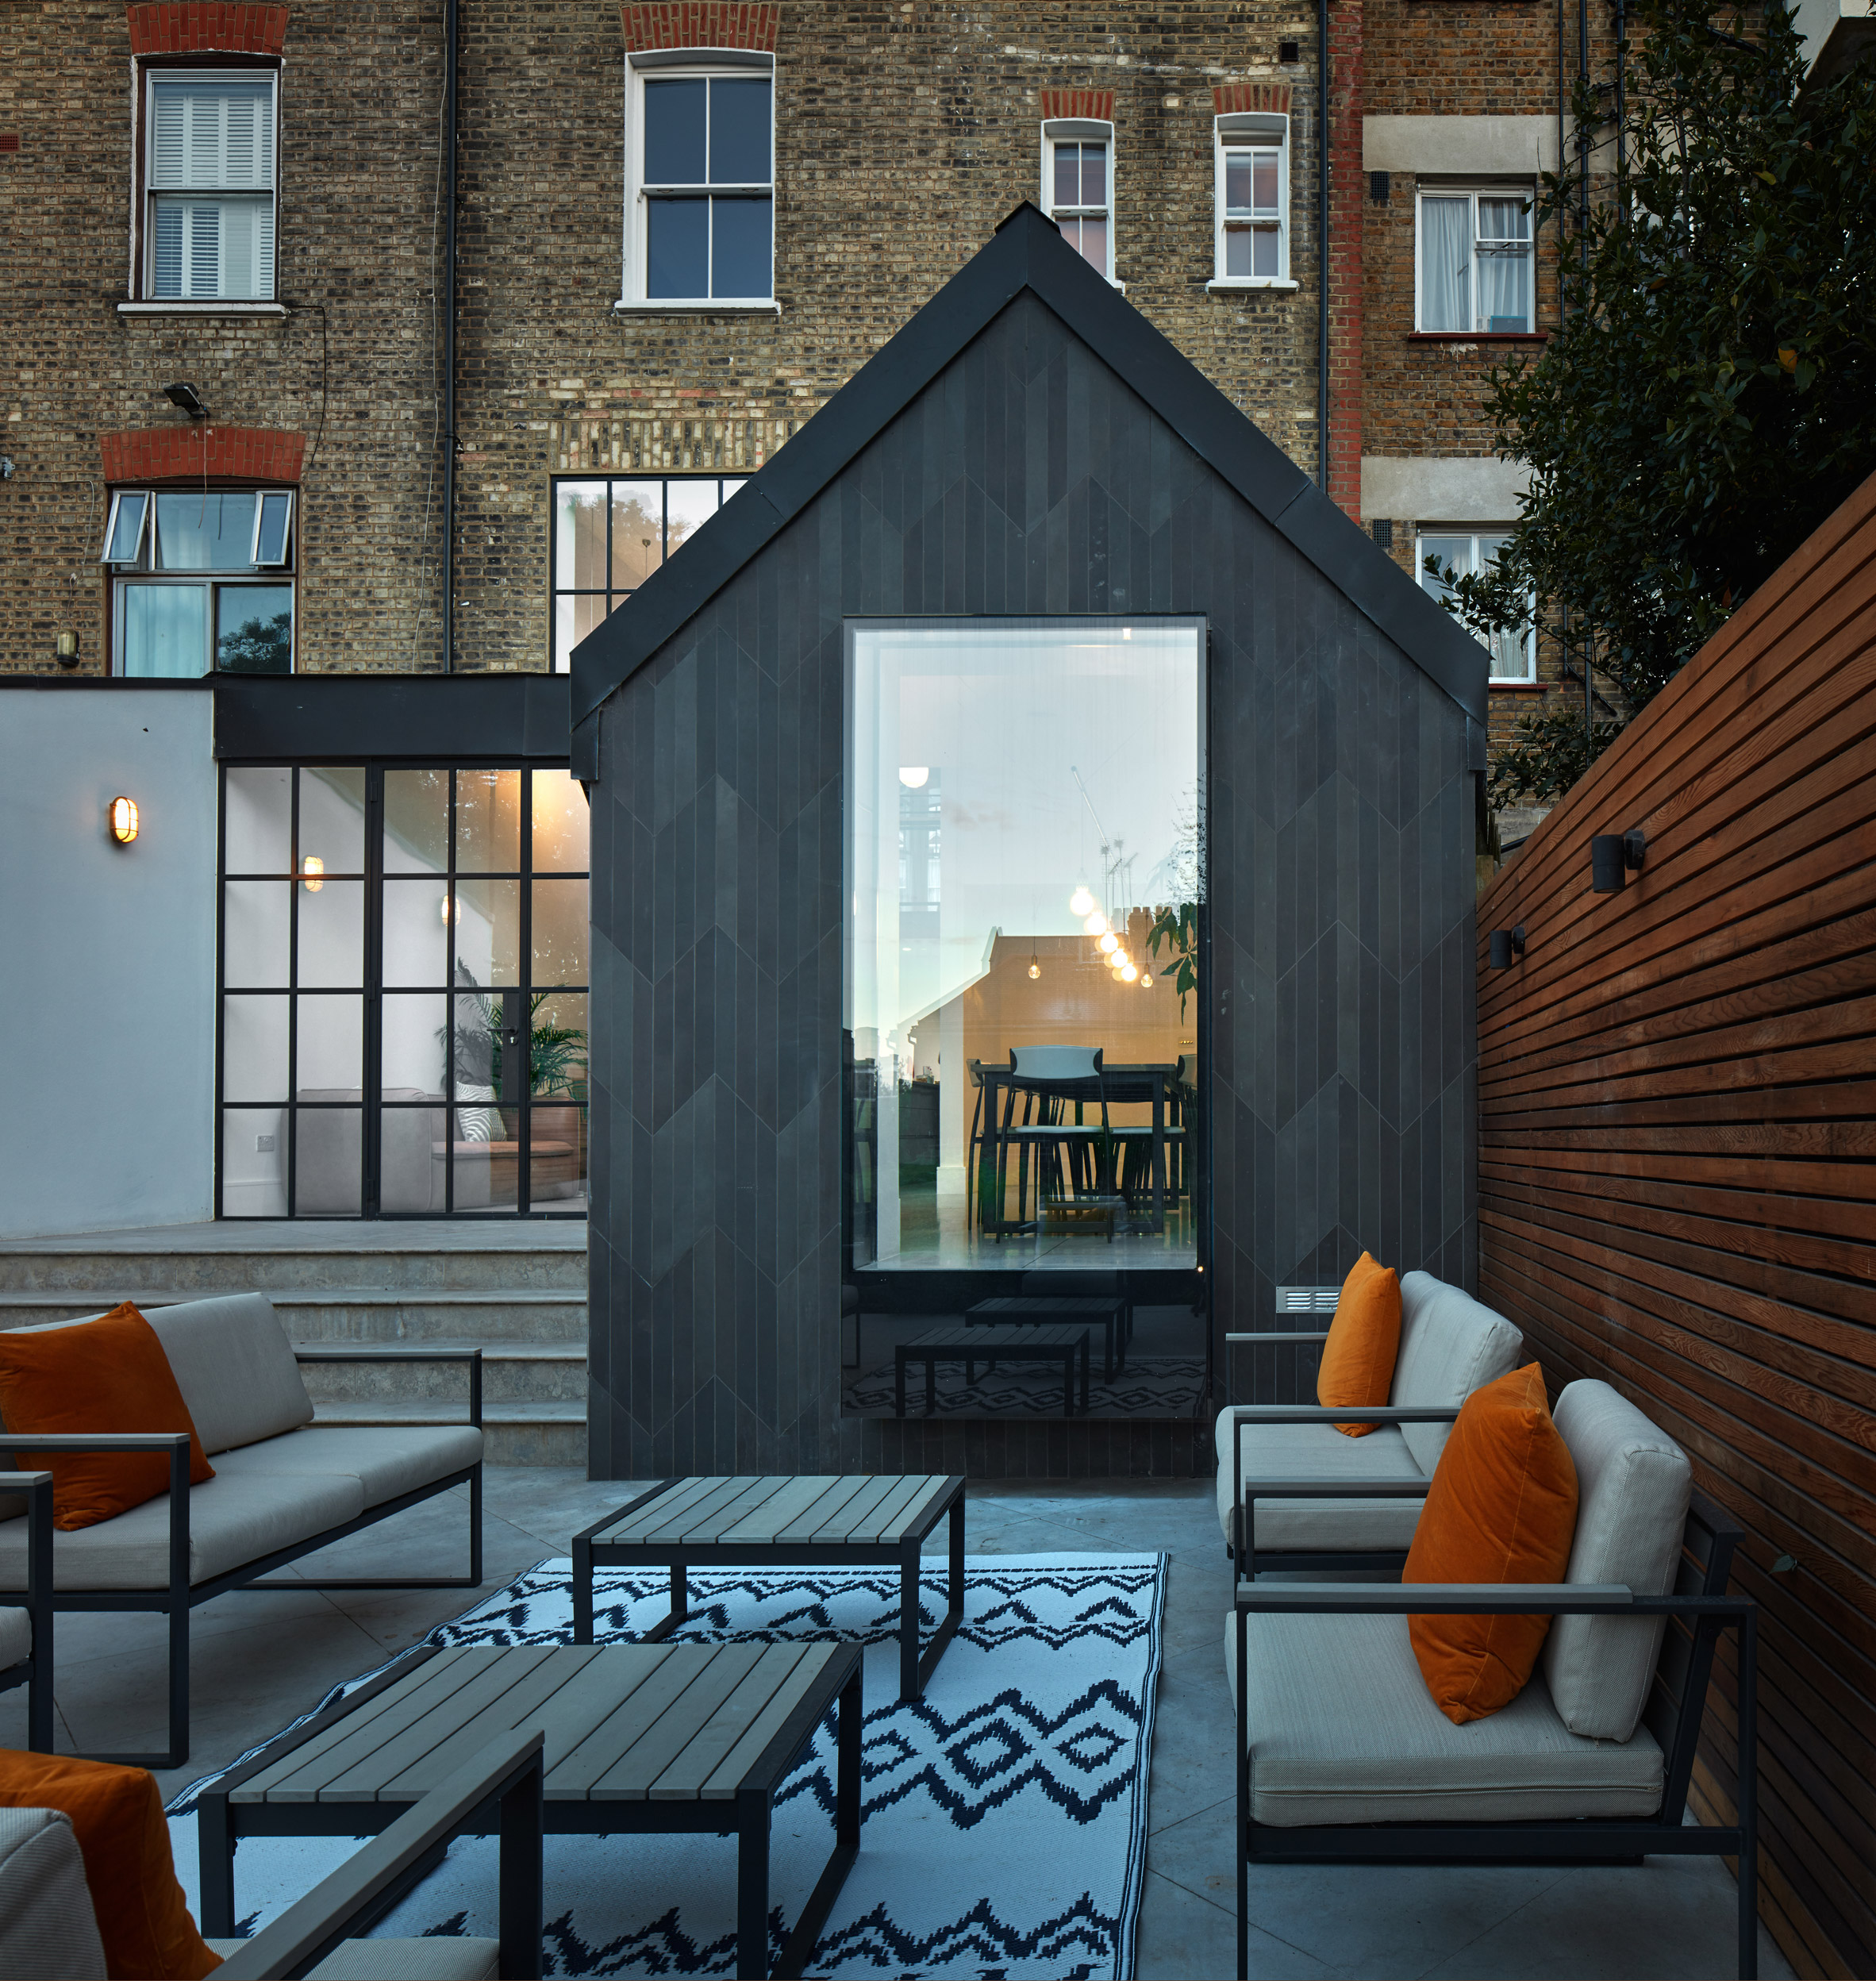 London townhouse updated with pared-back materials and patterns